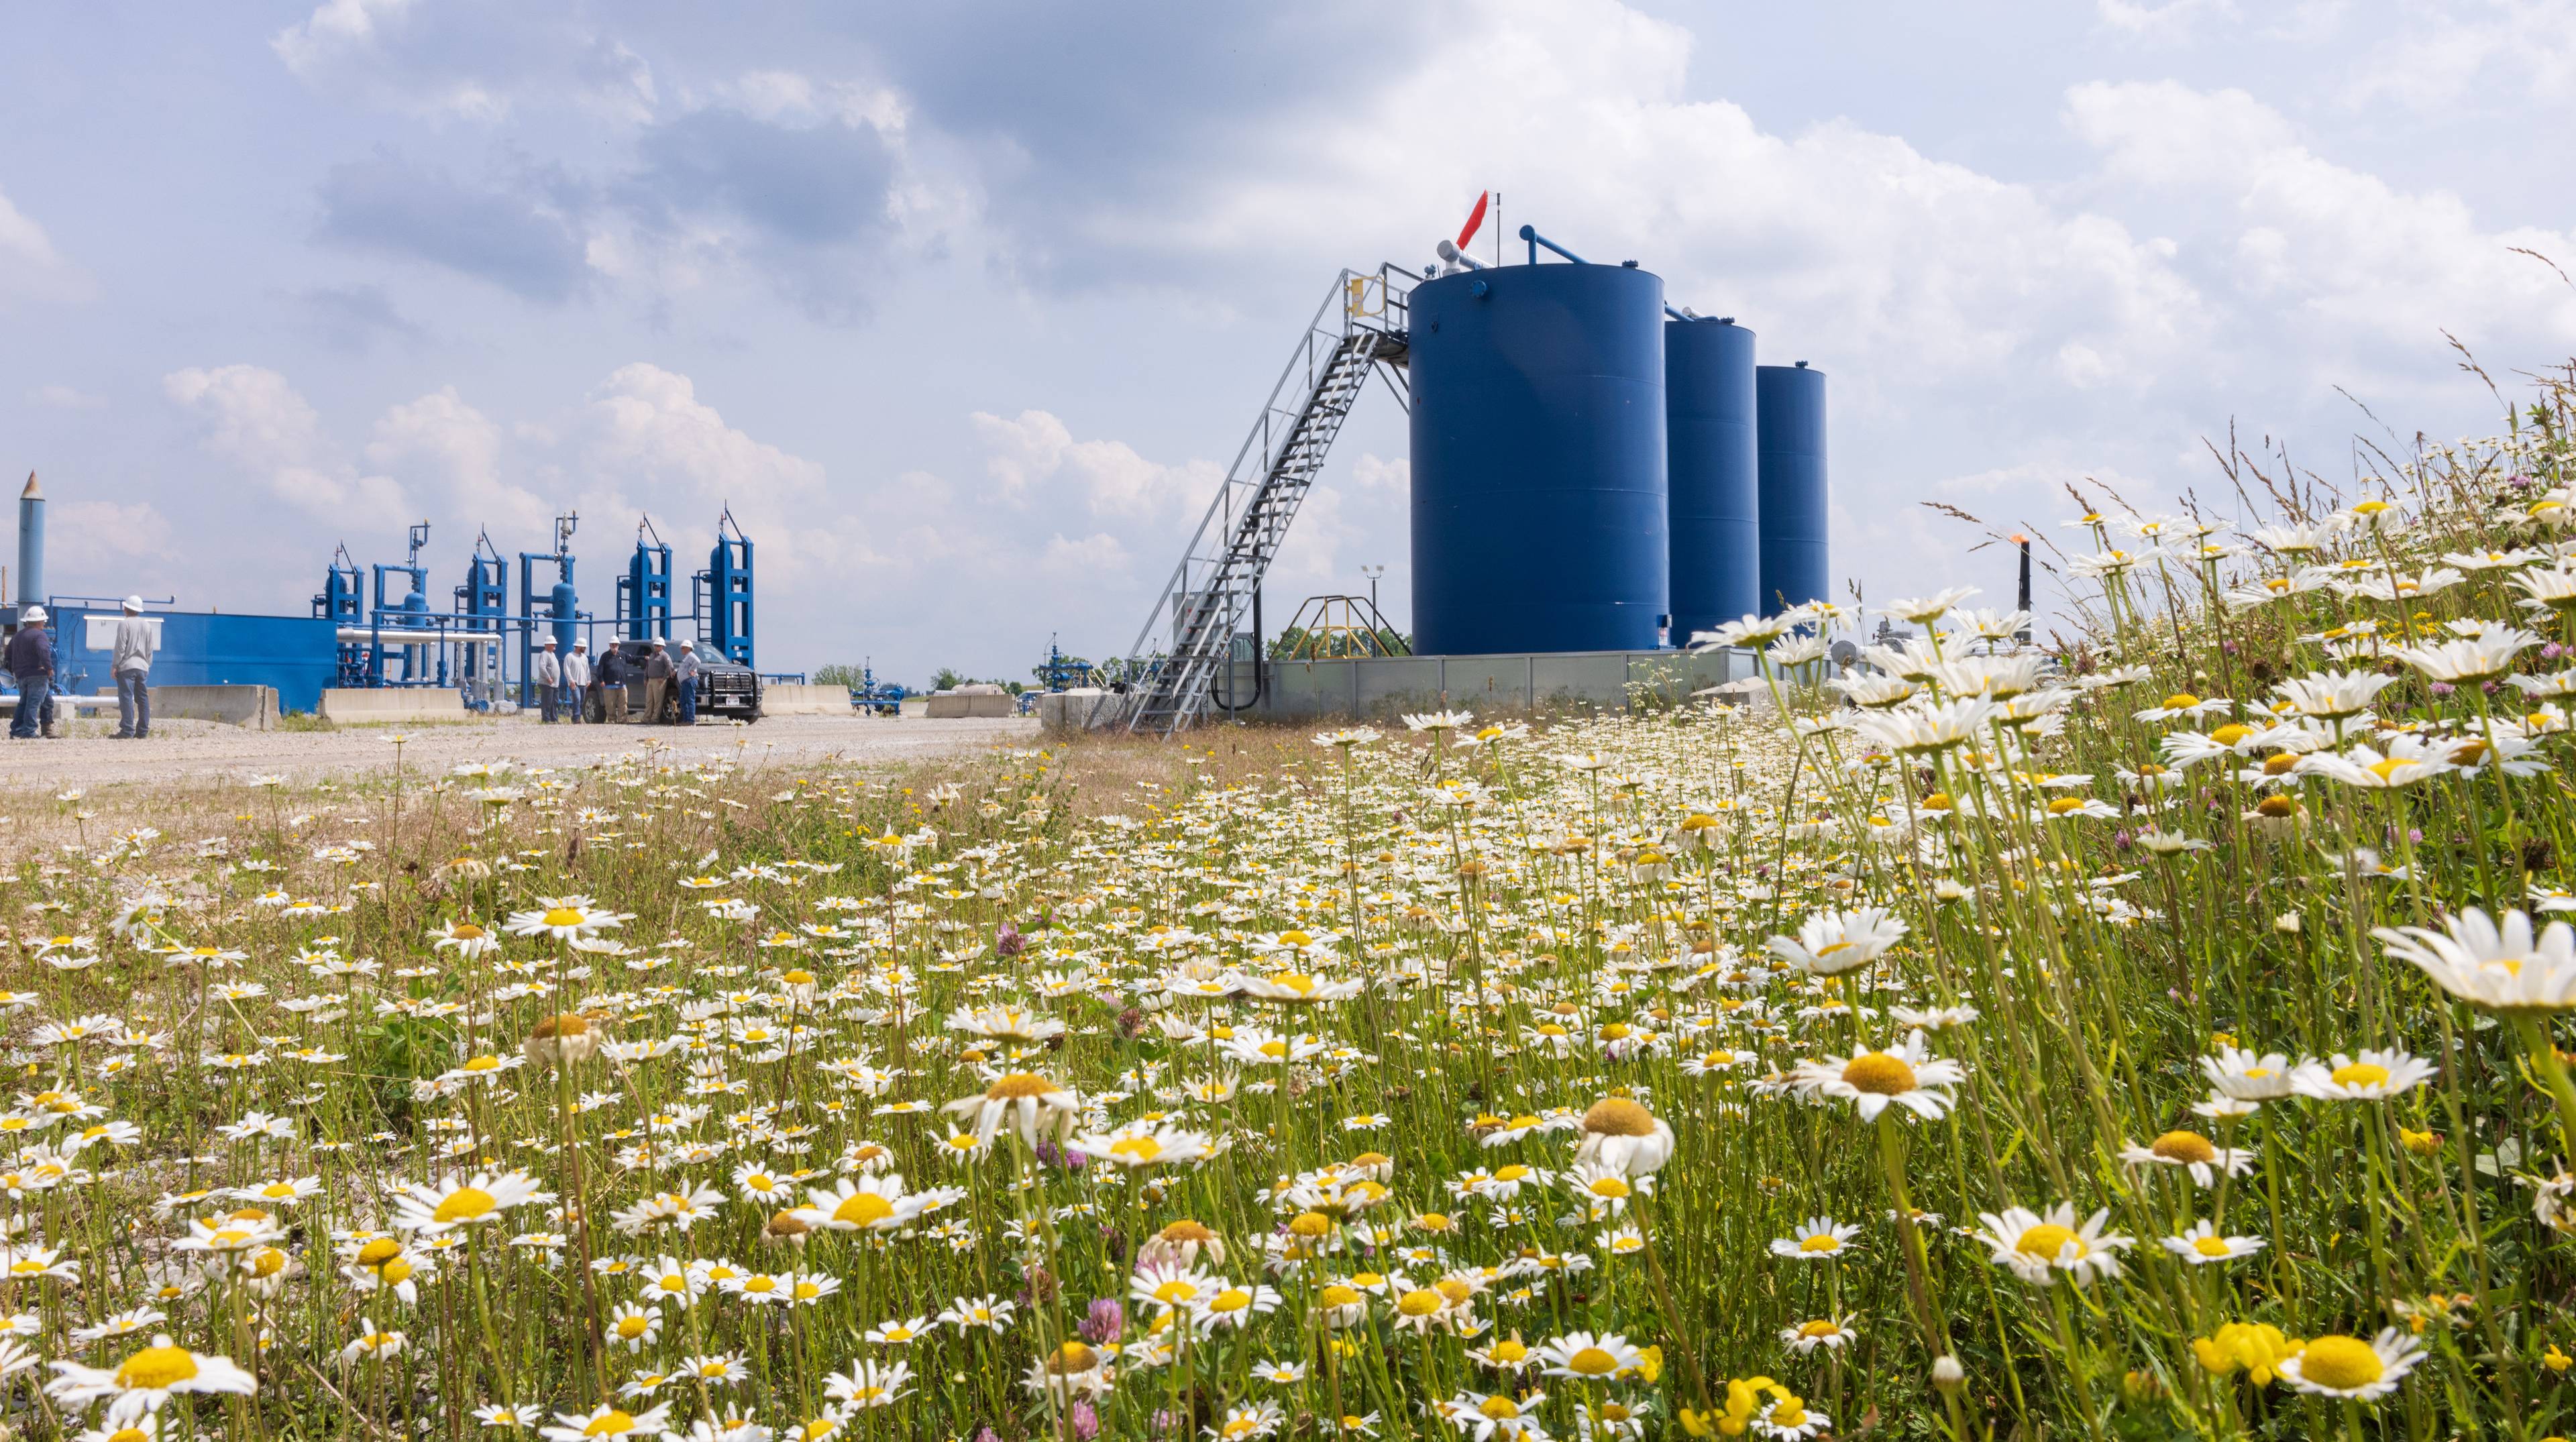 Processing facility with flowers in the foreground